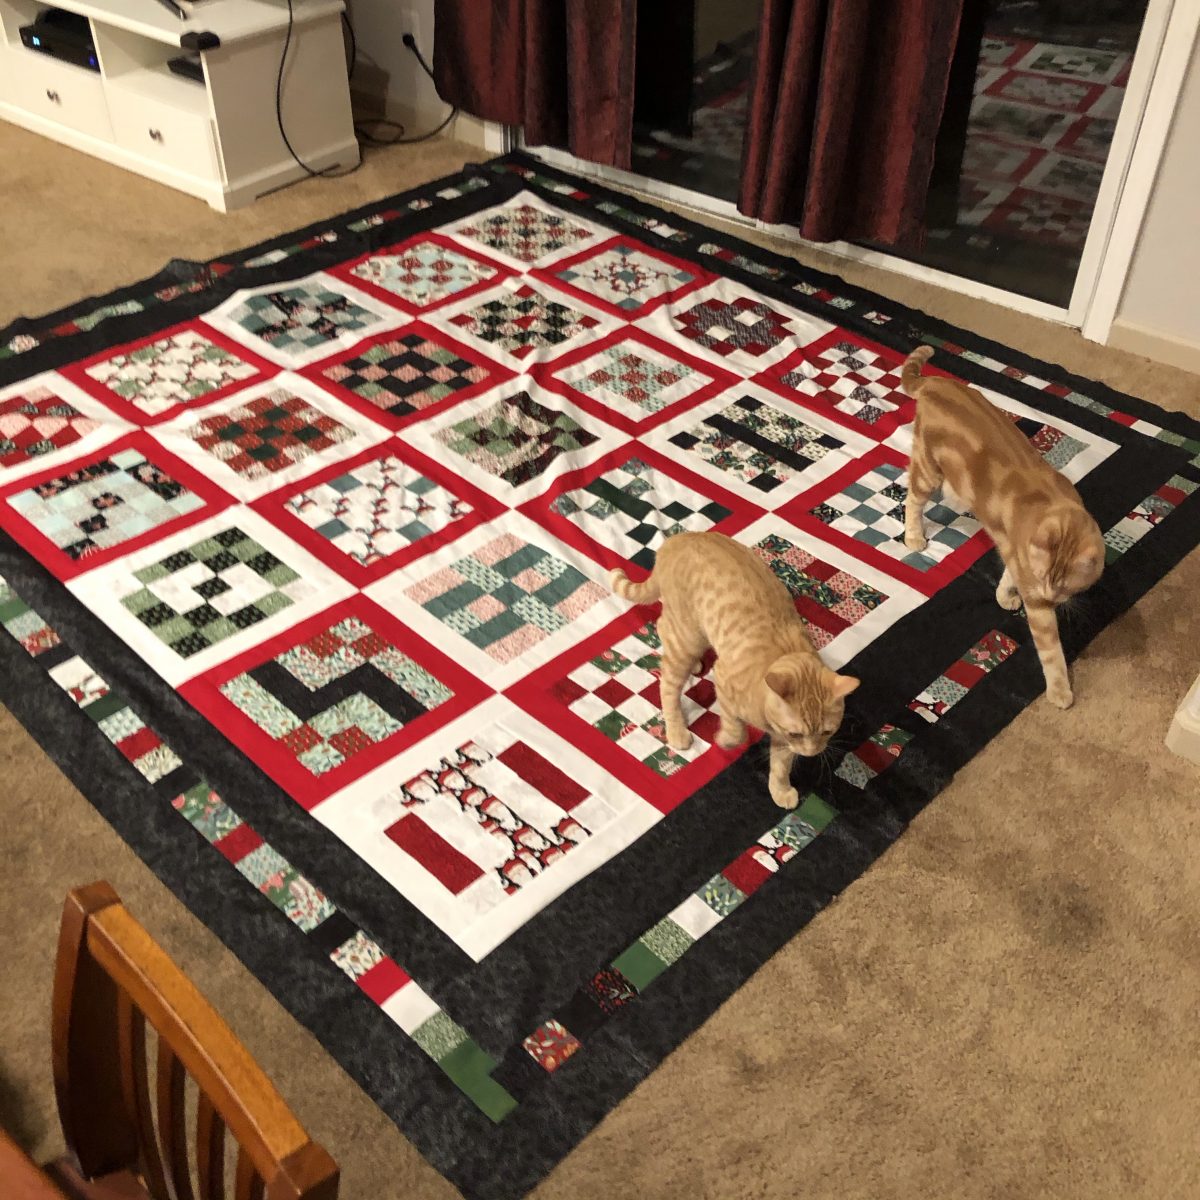 EPP QUILT DIARY: Christmas and Other Stitching